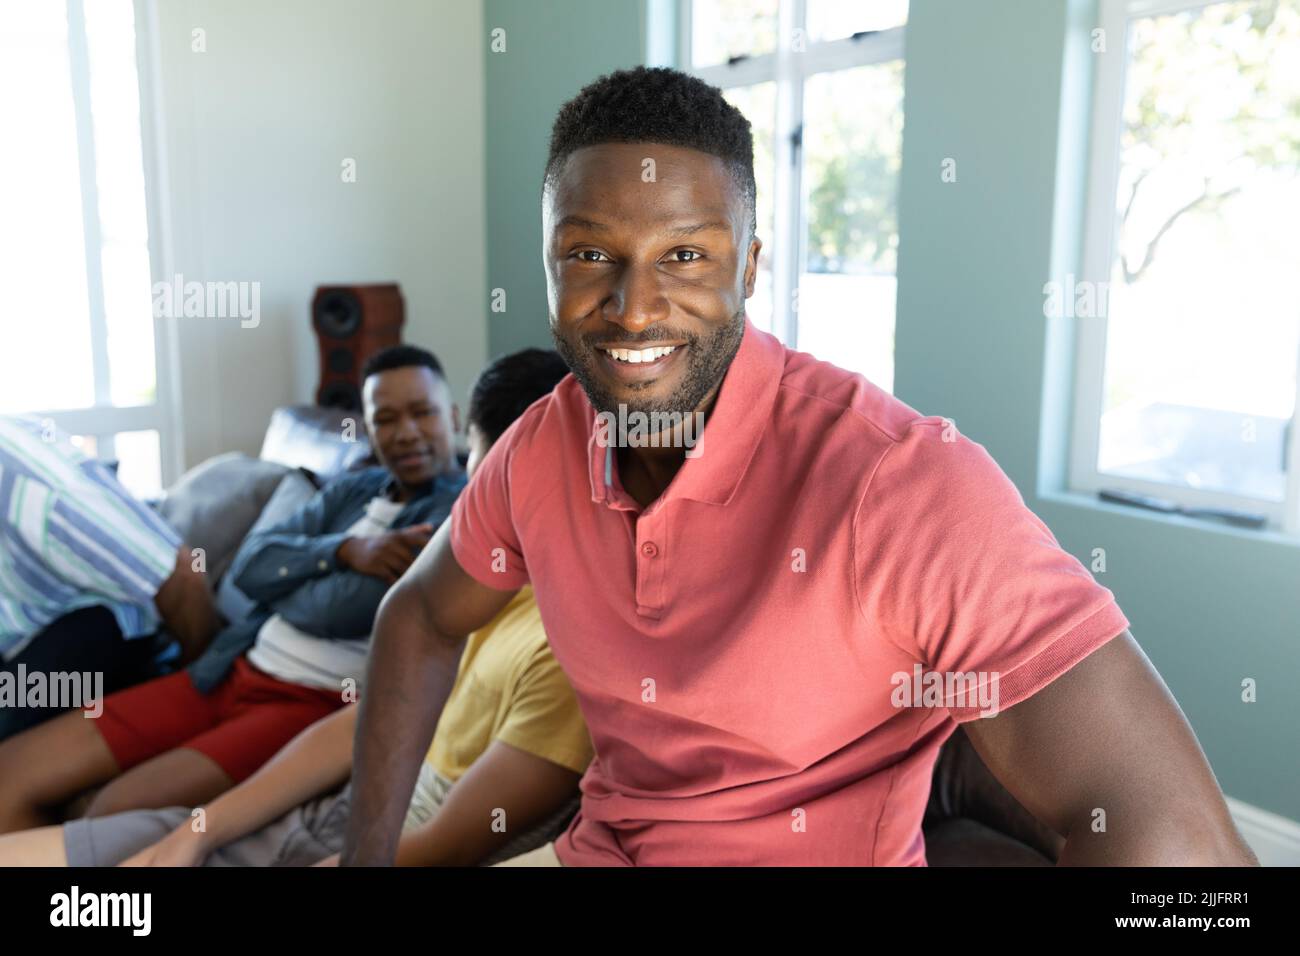 Portrait of smiling young man with multiracial male friends sitting on sofa in background at home Stock Photo